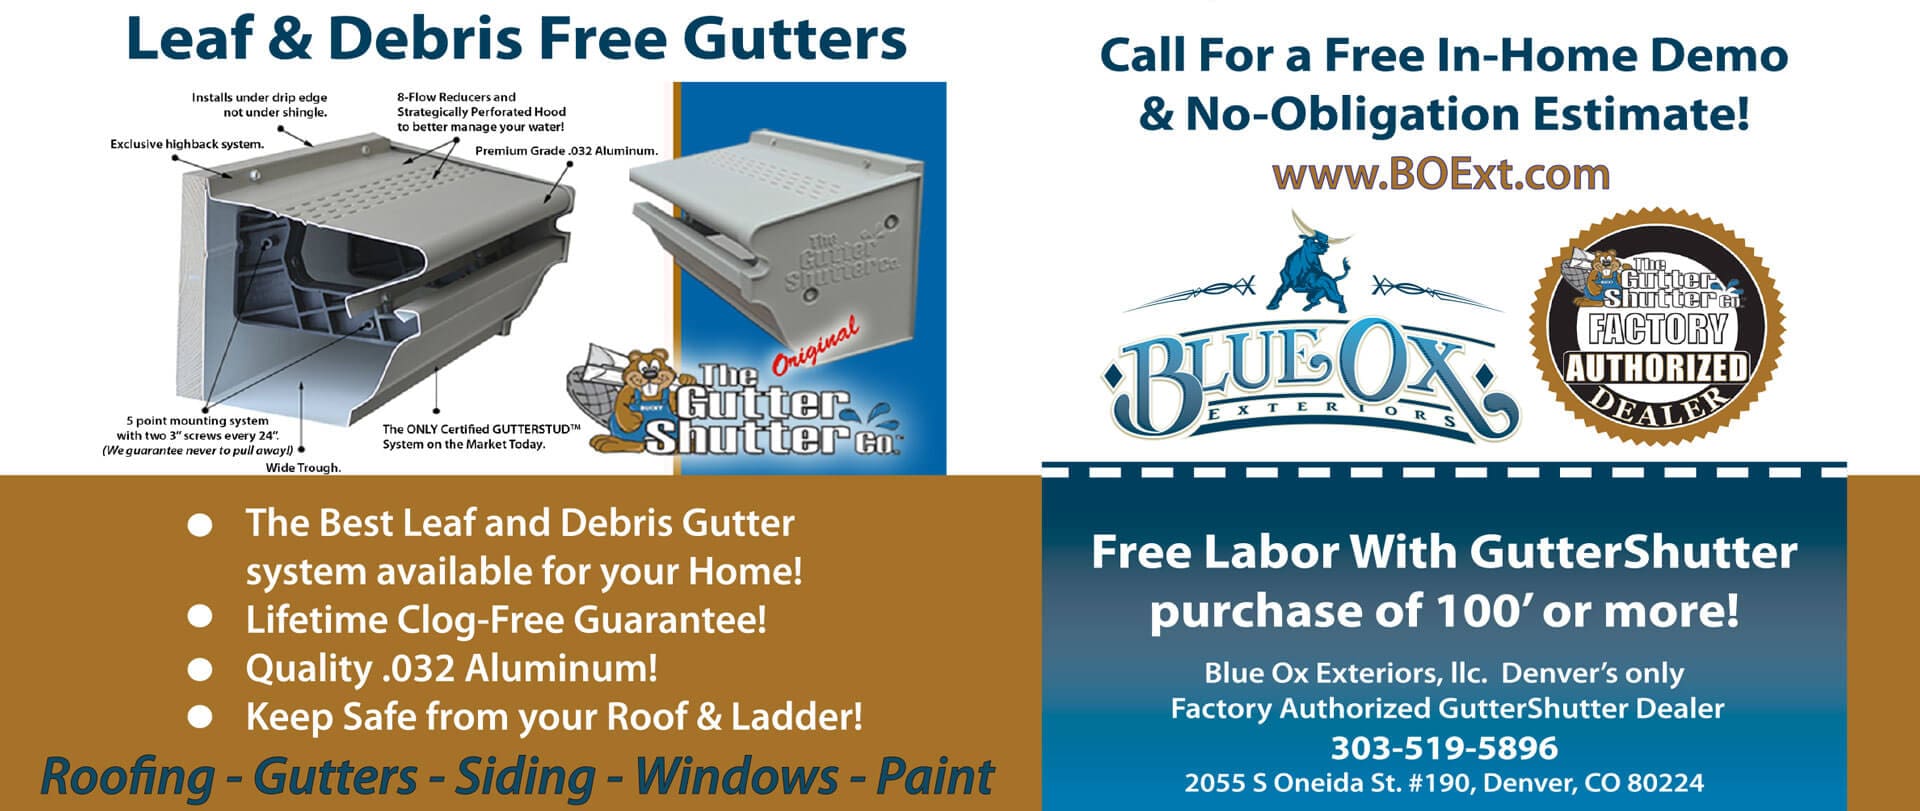 A flyer for the blue ox gutter company